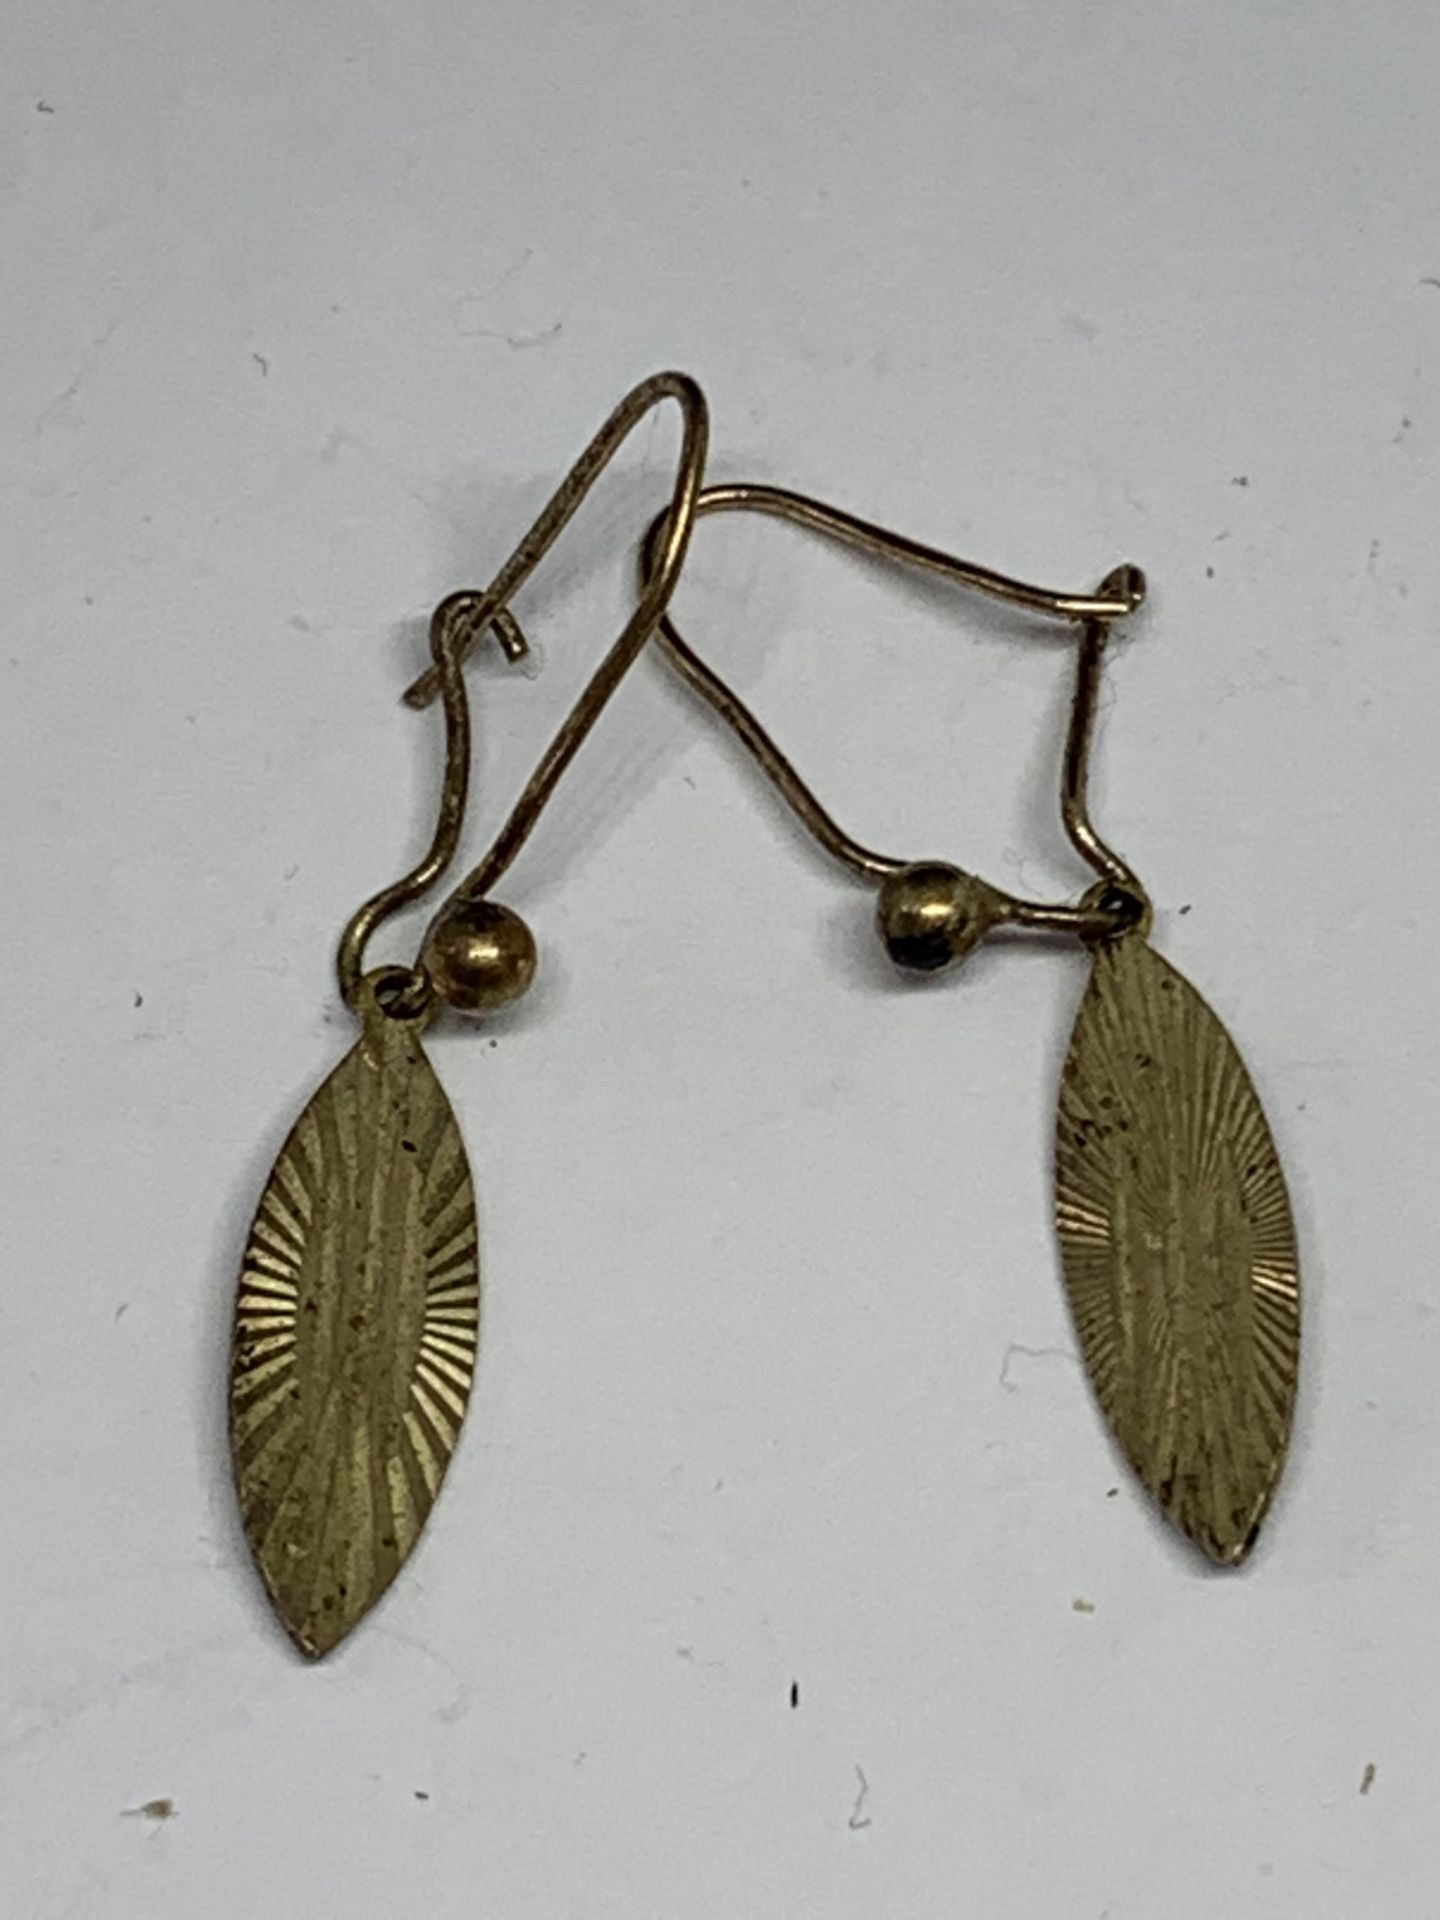 A PAIR OF 9 CARAT GOLD LEAF DESIGN DROP EARRINGS GROSS WEIGHT 1.26 GRAMS IN A BOX